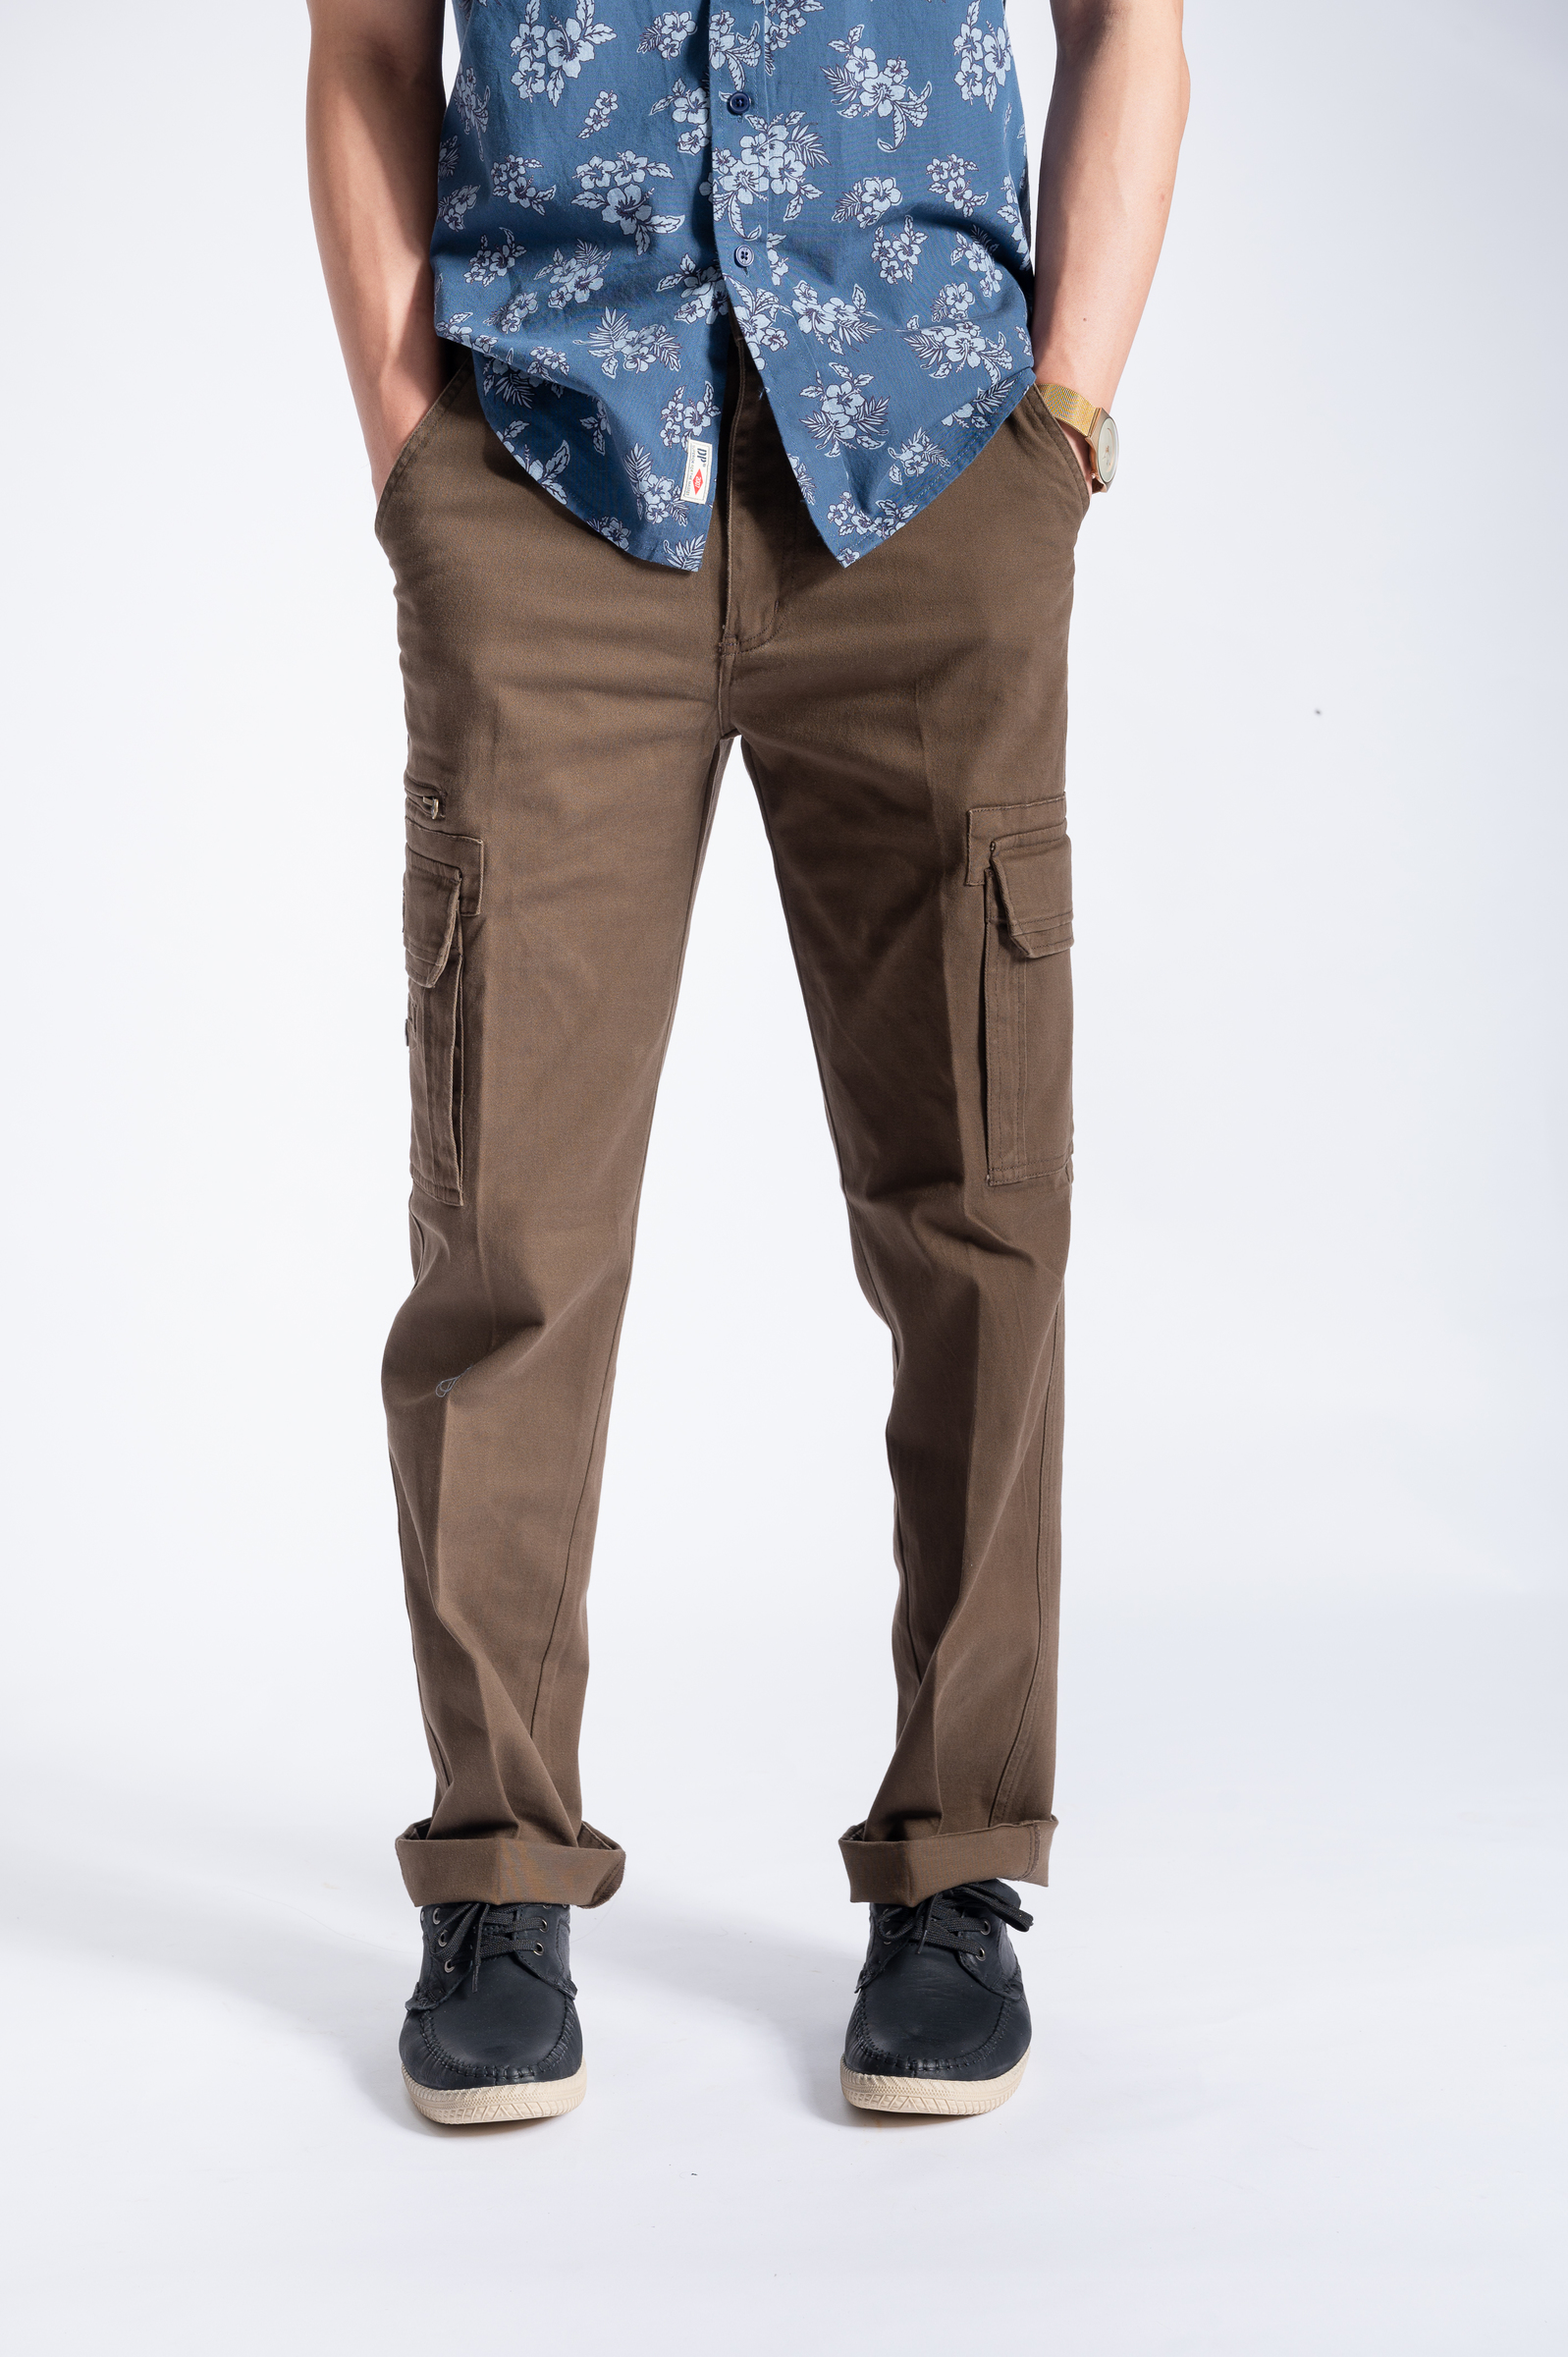 Discover 88+ about mens cargo pants australia cool - NEC